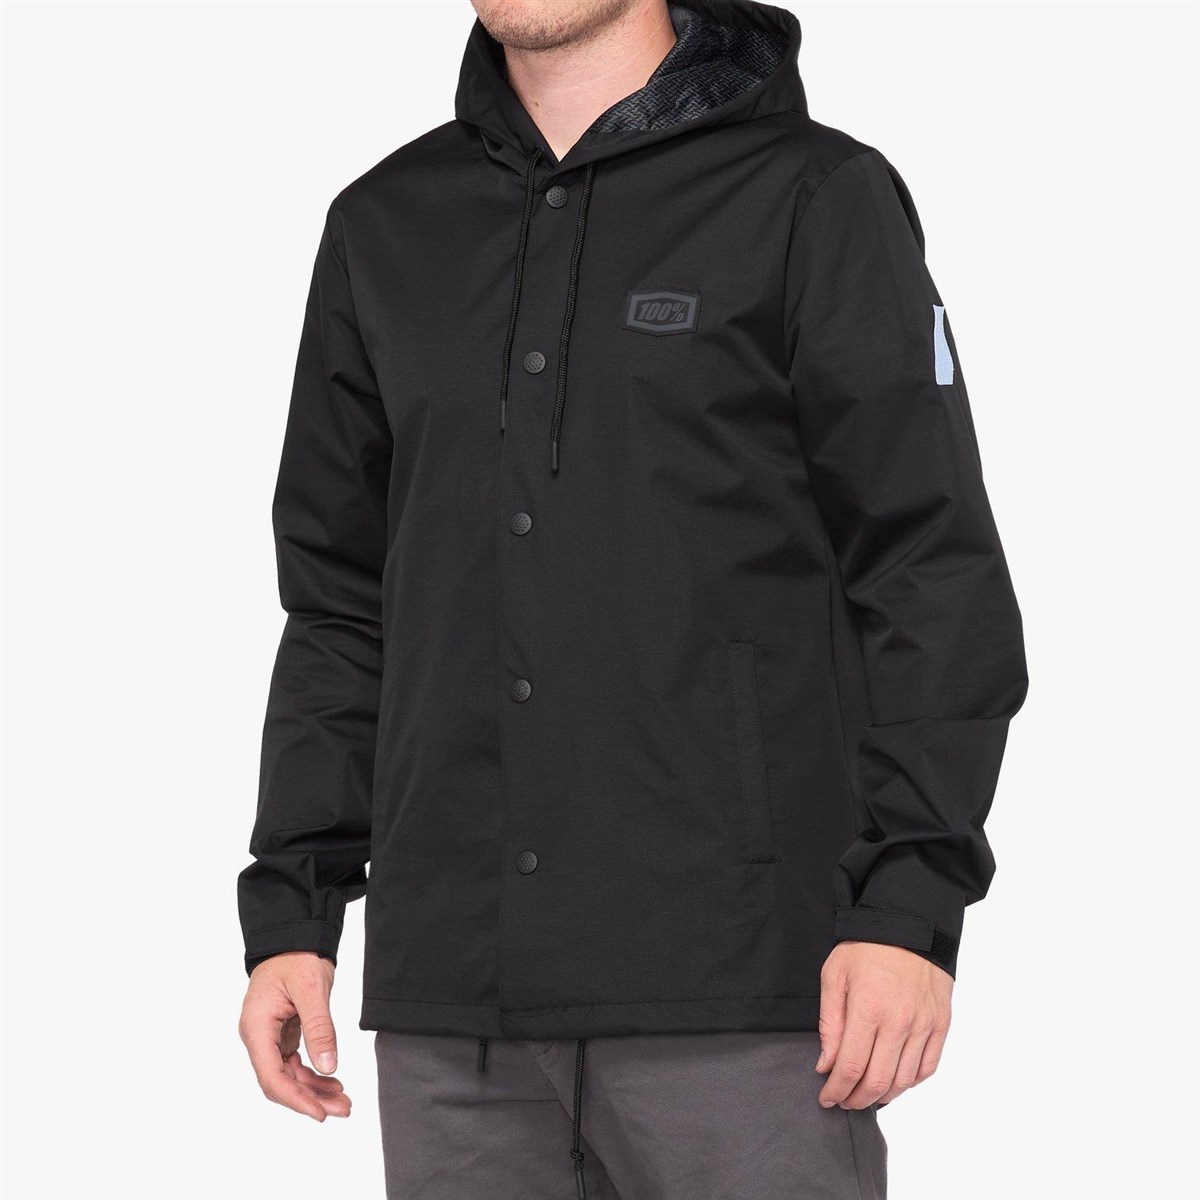 100% Apache Hooded Snap Jacket product image